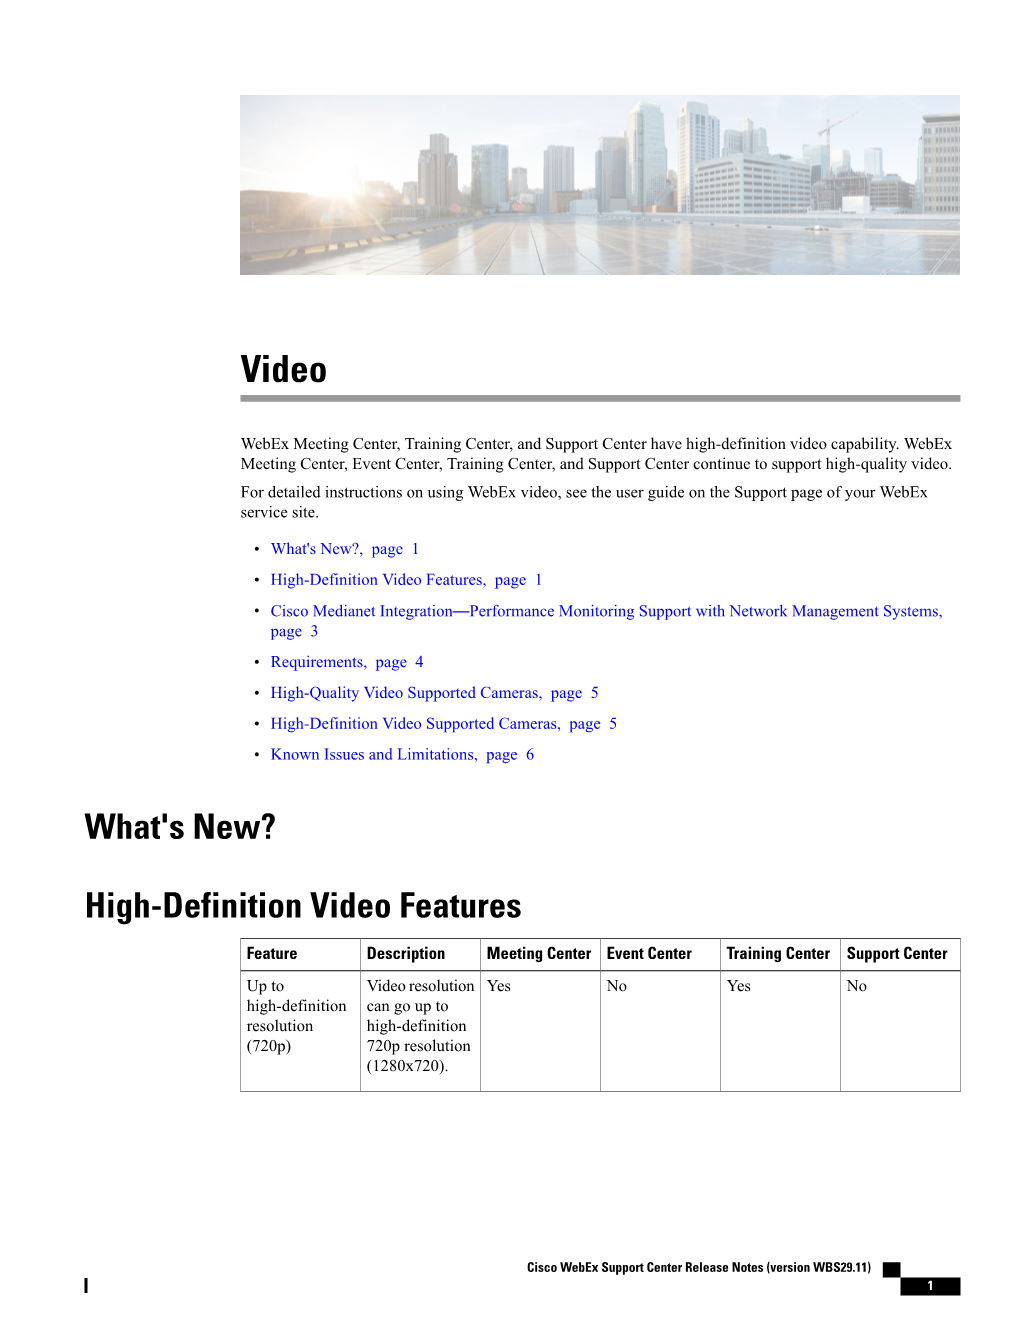 High-Definition Video Features